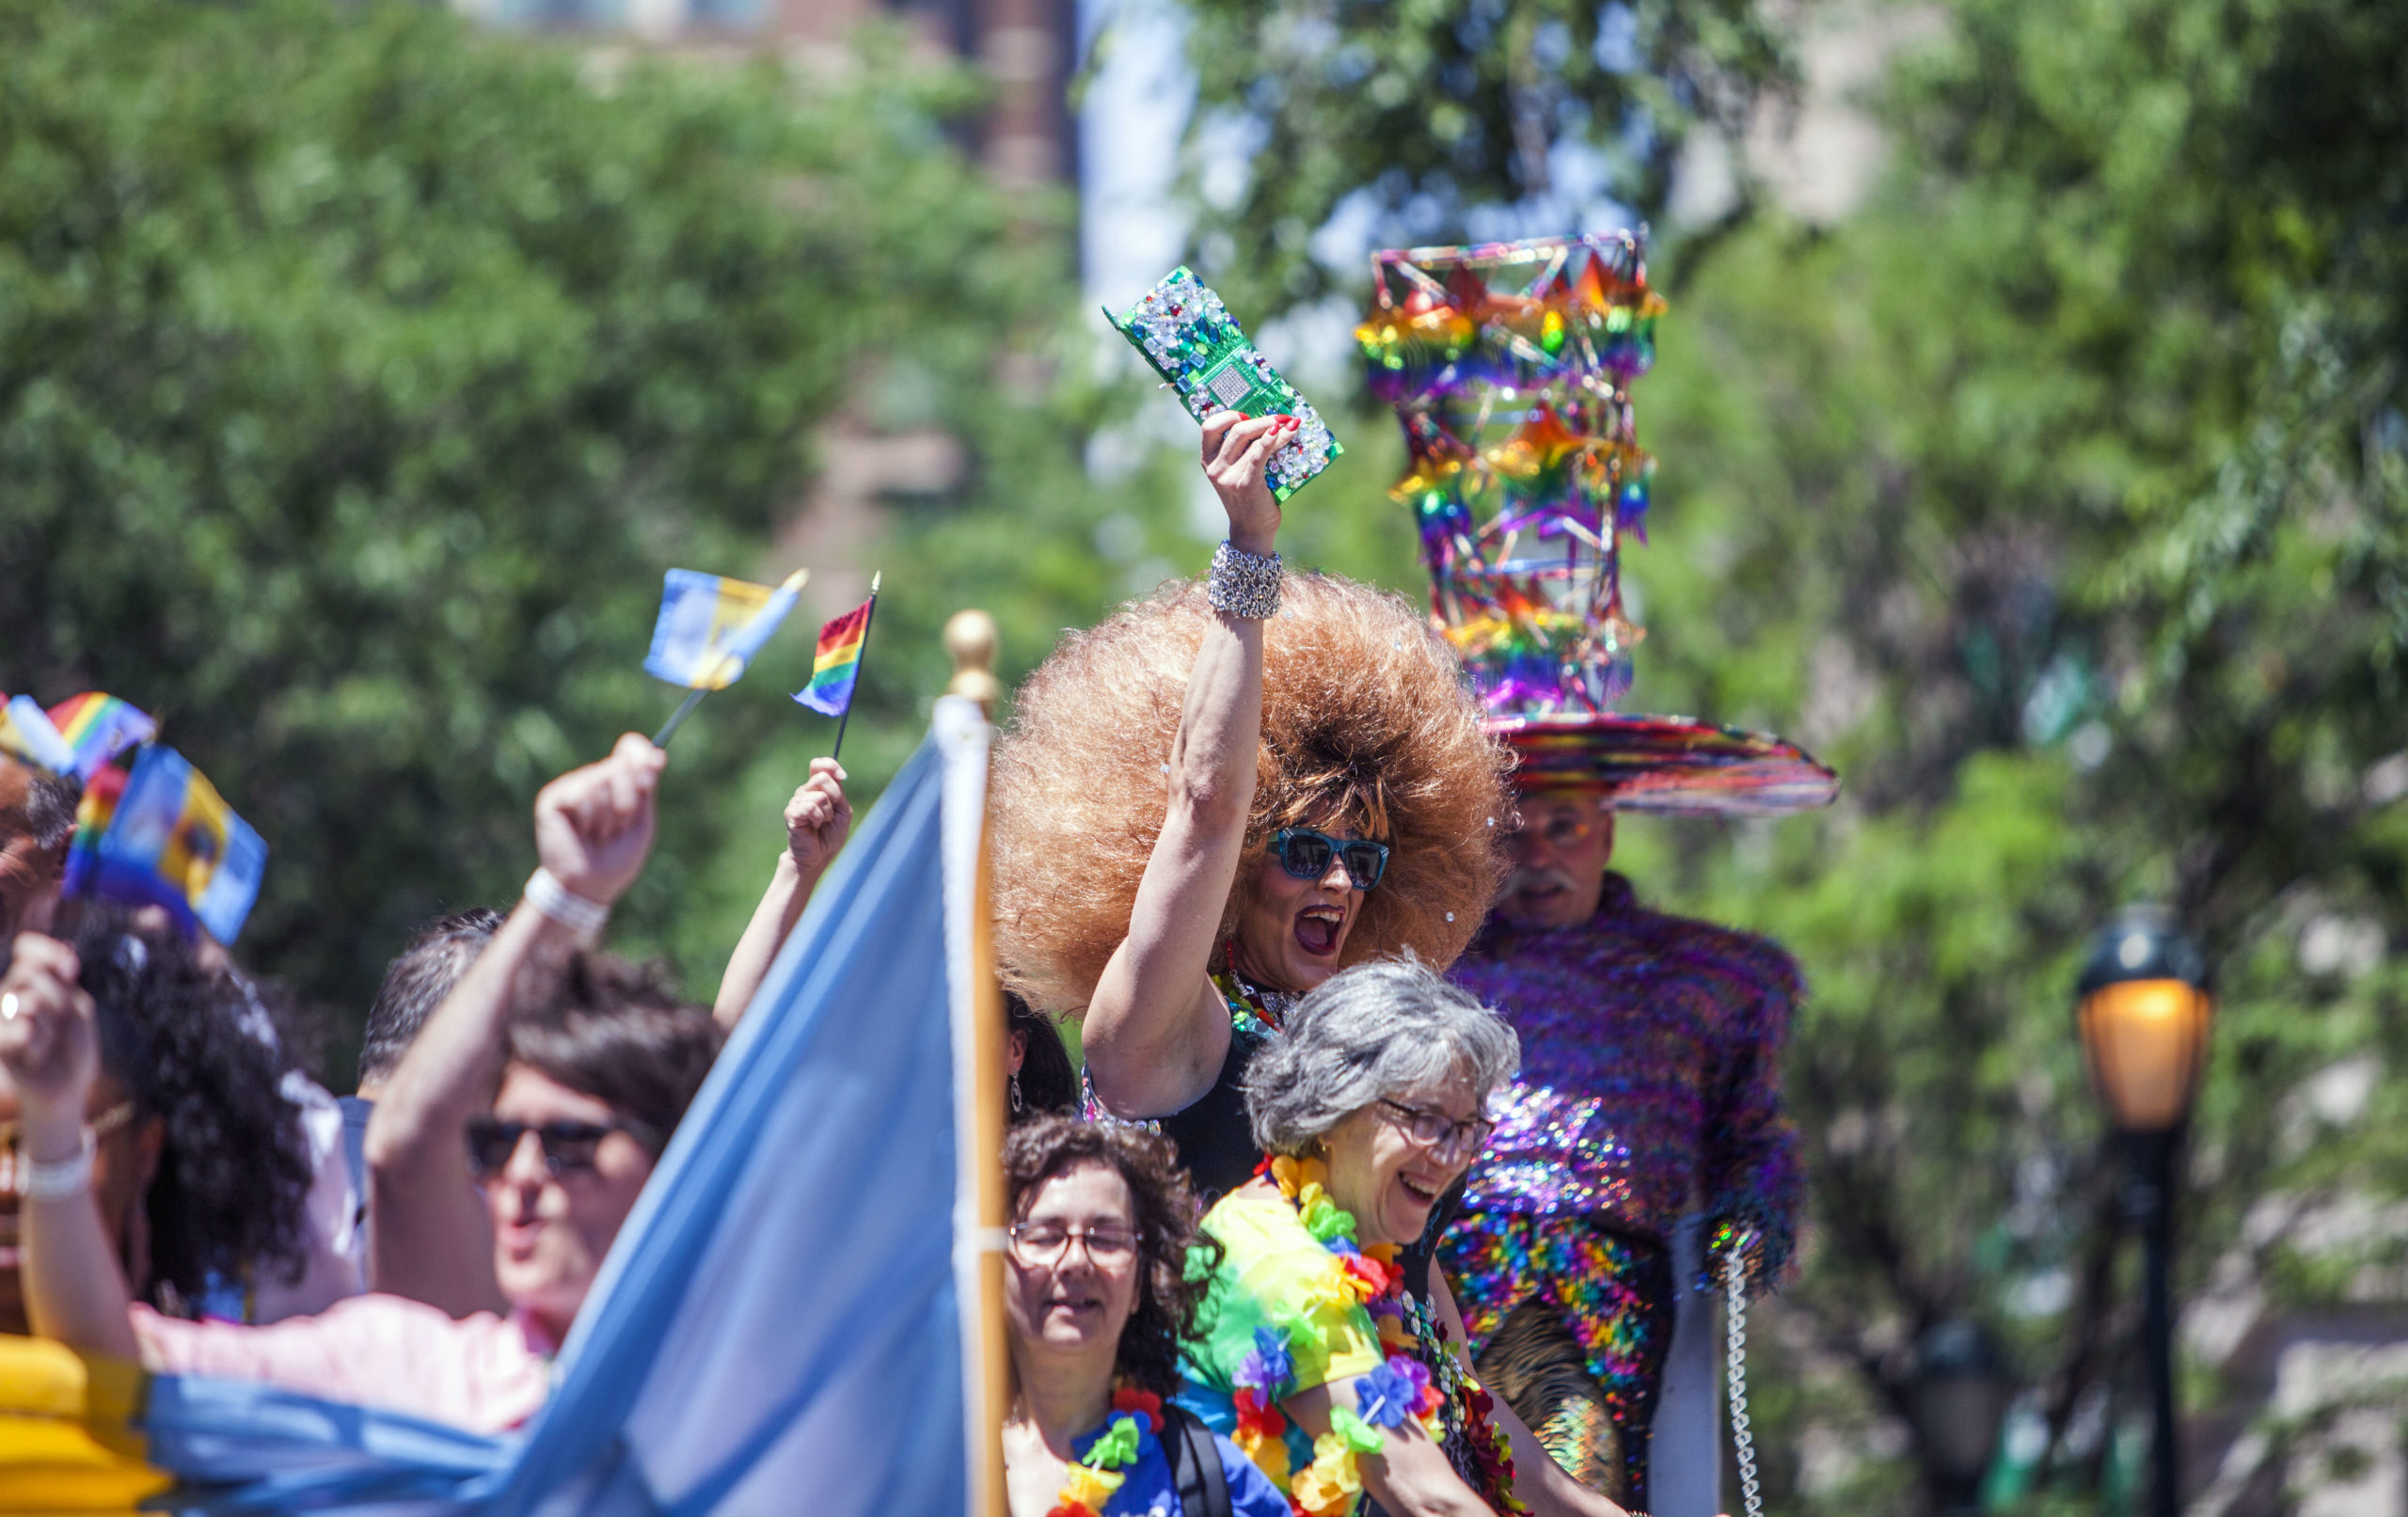 Grand Marshals wave from a float as they participate in the 2016 Gay Pride Parade march through downtown on June 12, 2016 in Philadelphia, Pennsylvania. The mood was celebratory despite news of the mass shooting this morning in a gay club in Orlando, Florida. (Photo by Jessica Kourkounis/Getty Images)